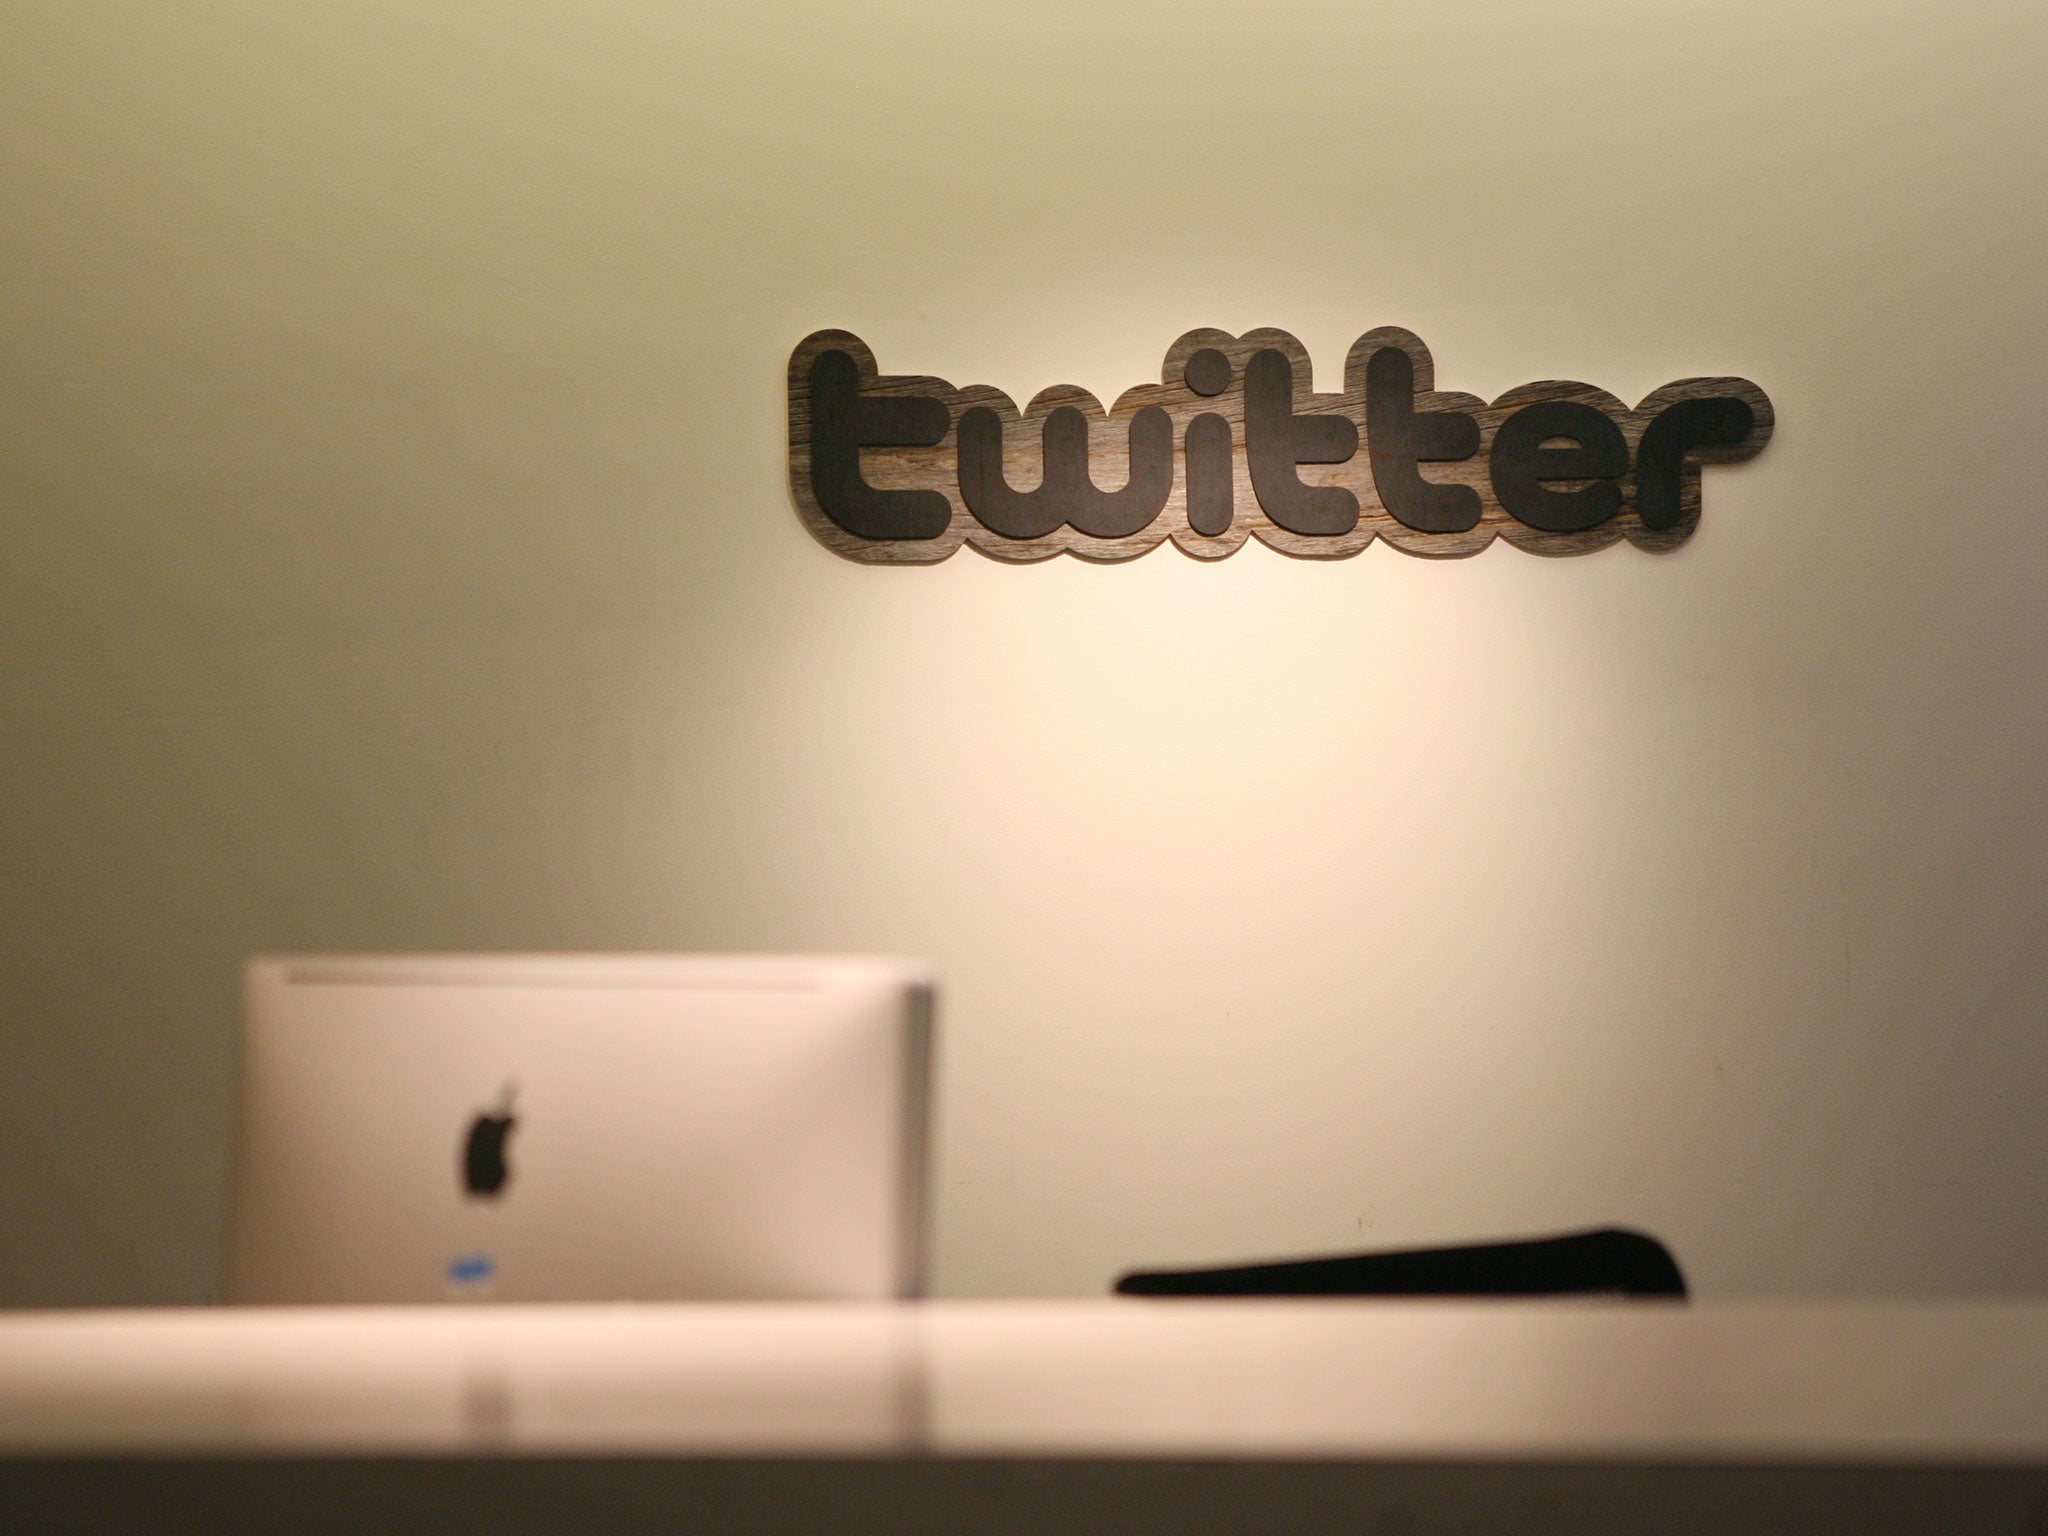 Twitter logo is displayed at the entrance of Twitter headquarters in San Francisco